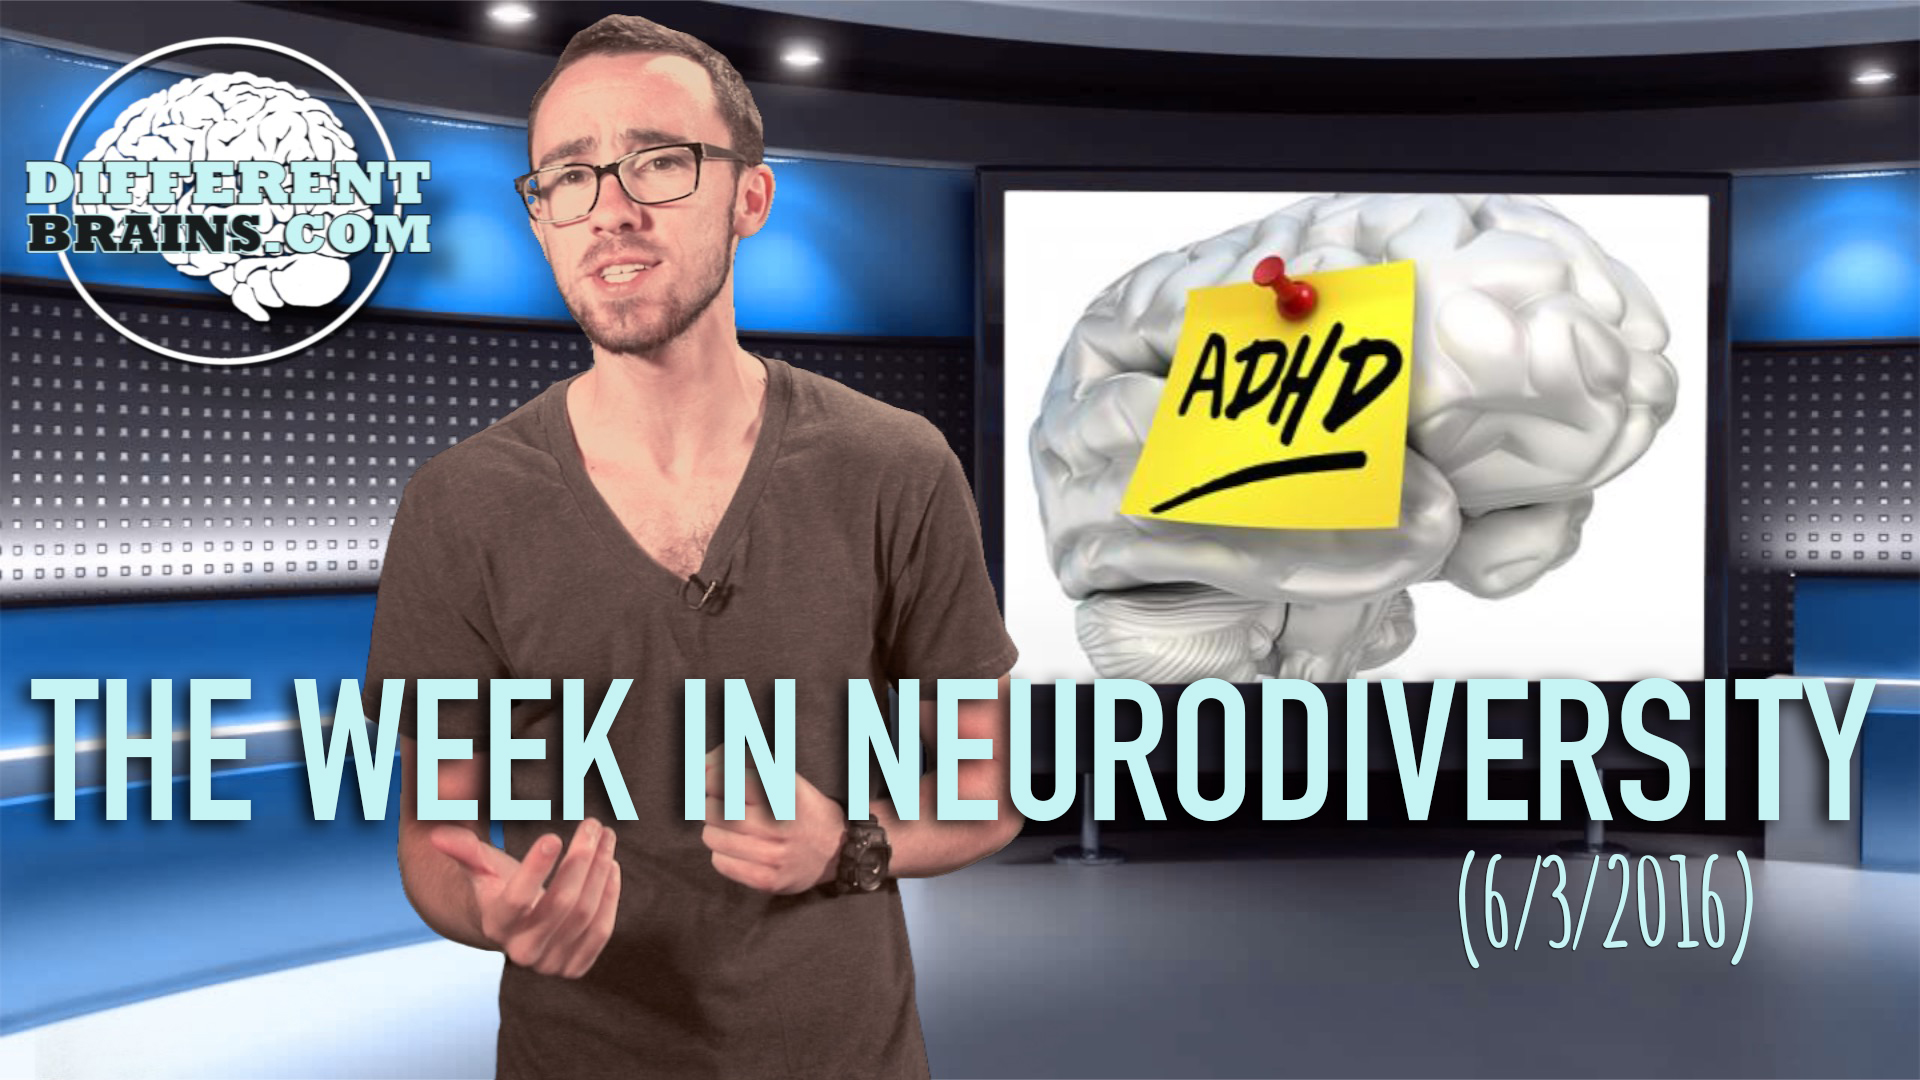 Do Kids And Adults Have Different ADHD? - The Week In Neurodiversity (06/03/16)